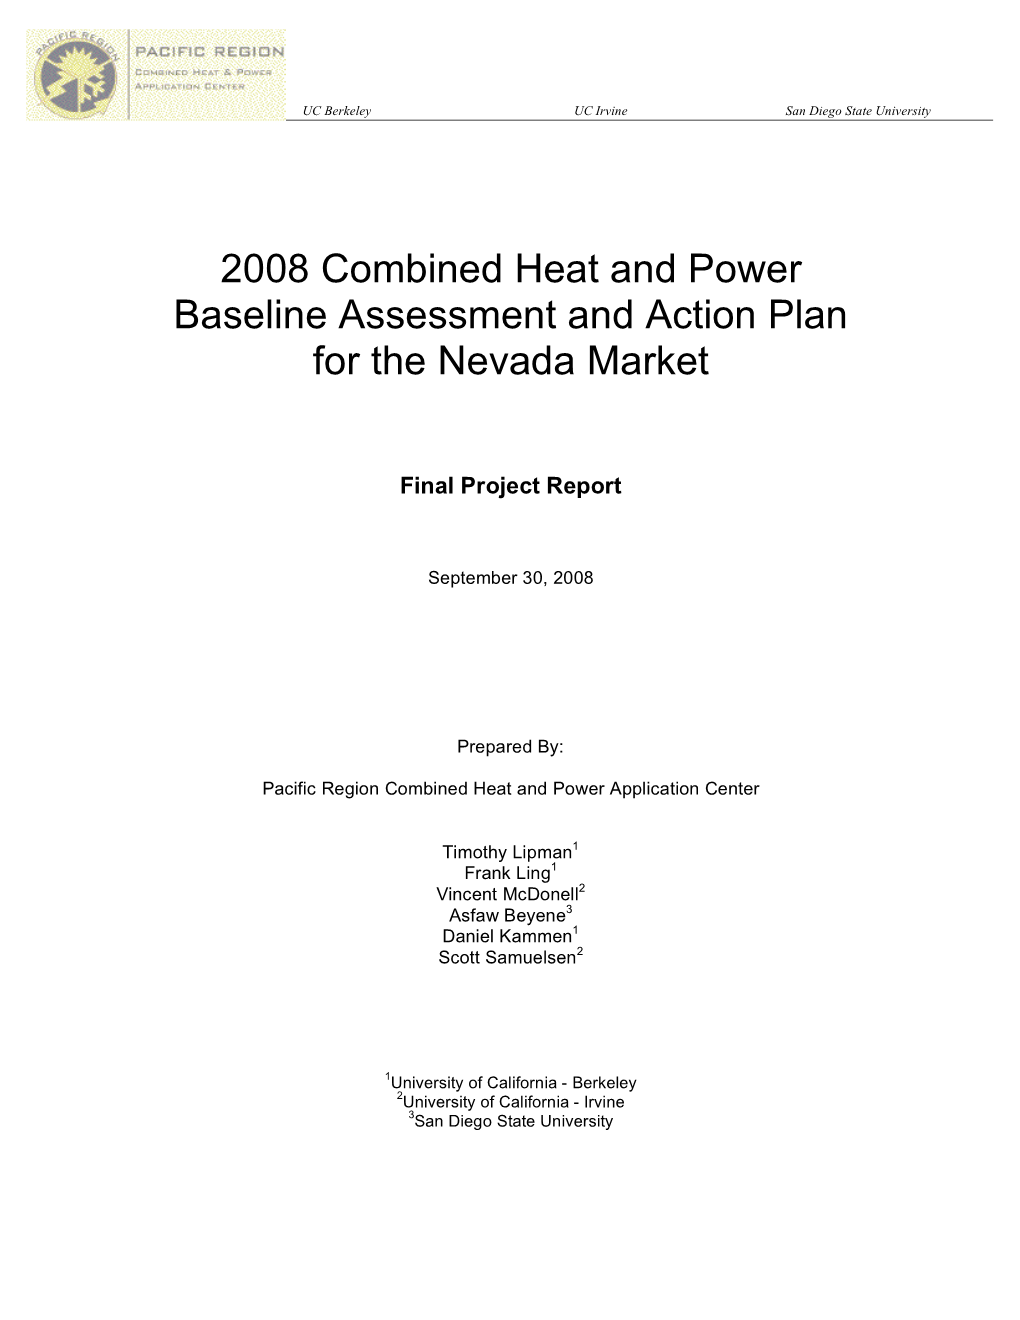 ITP Distributed Energy: 2008 Combined Heat and Power